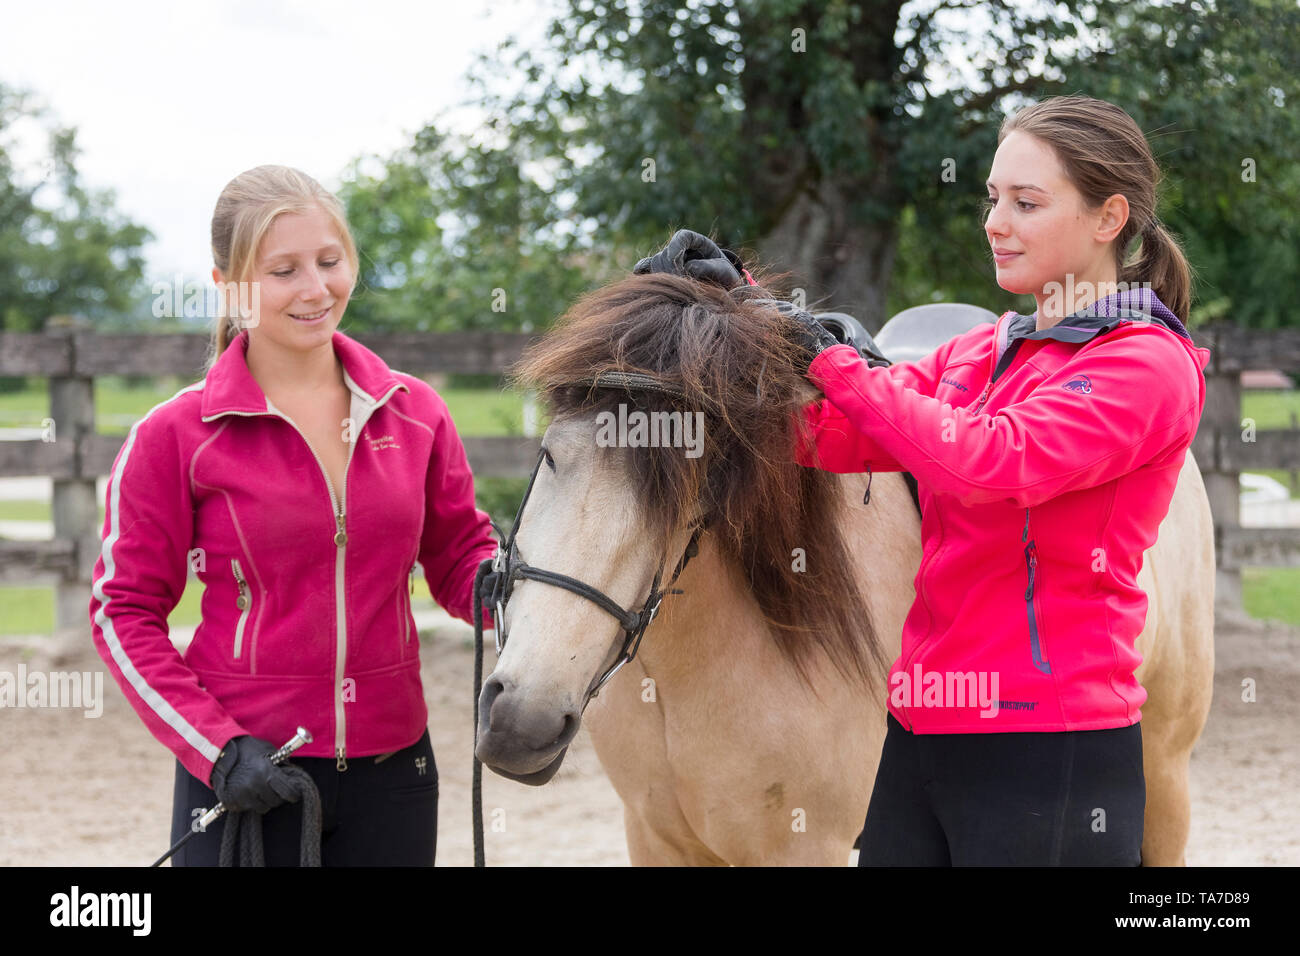 Icelandic Horse. Juvenile dun horse being trained to accept a bridle. Austria Stock Photo